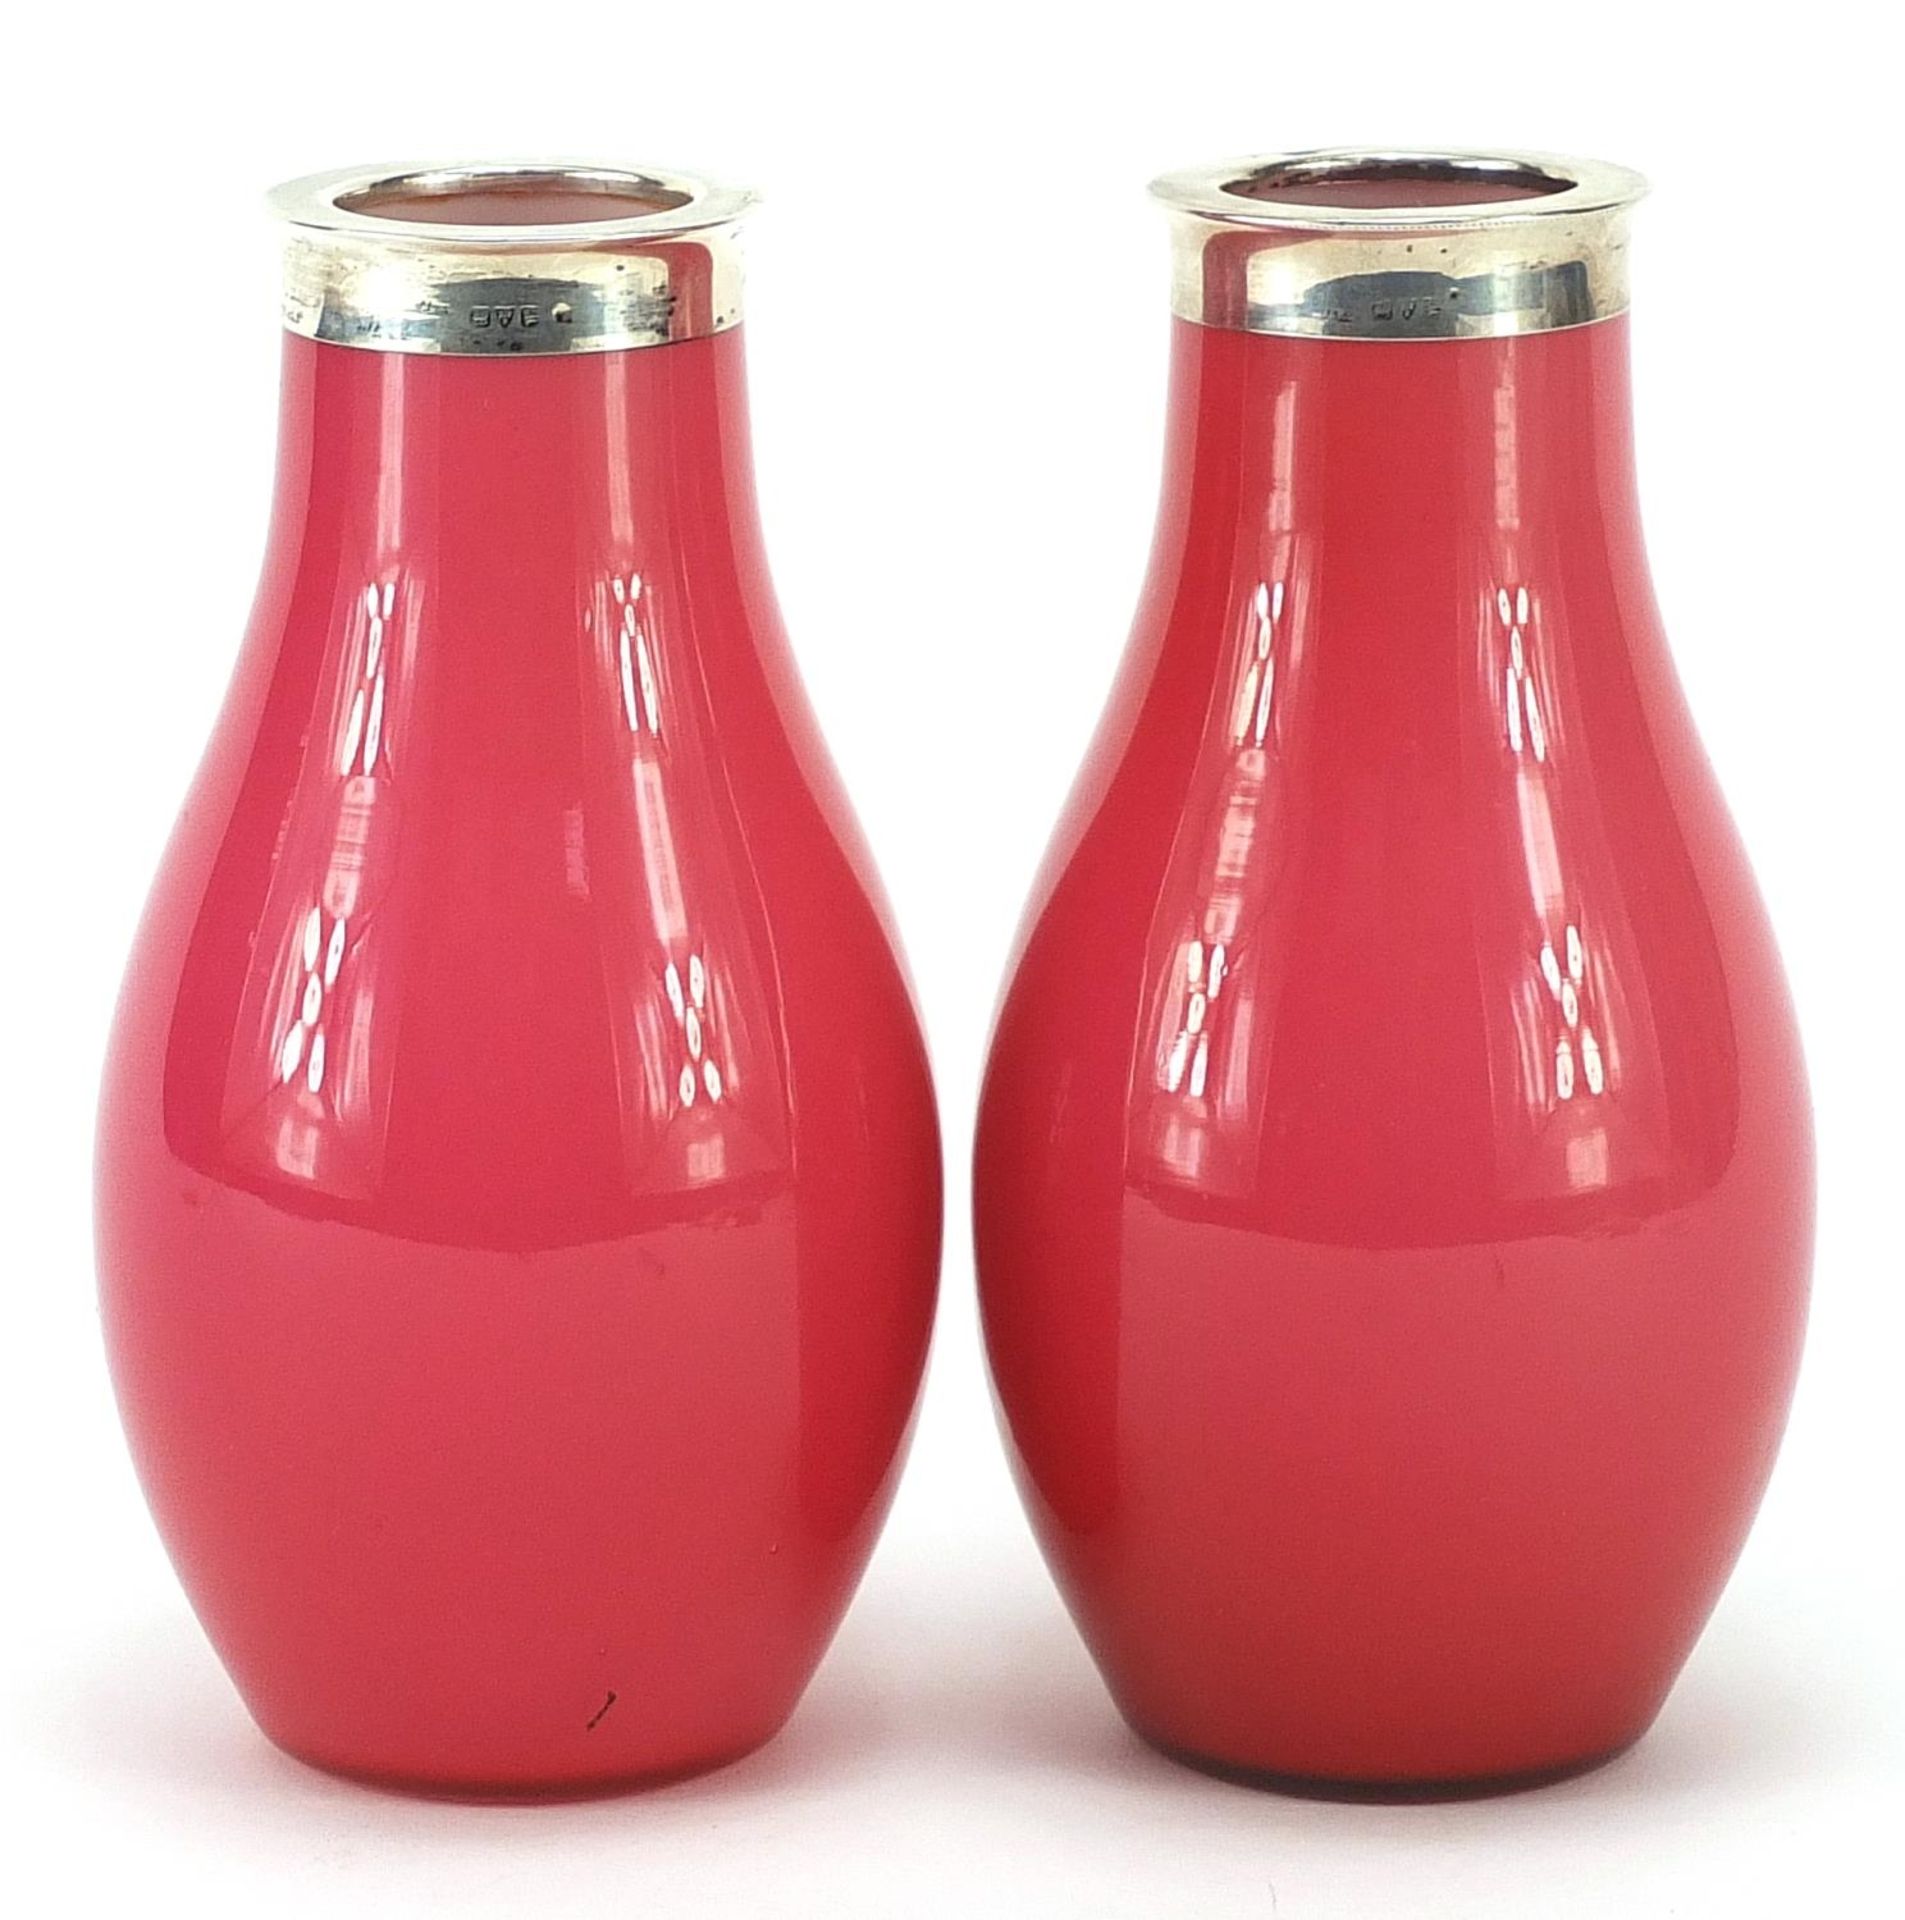 Pair of Edwardian pink and white cased glass vases with silver rims, J & R Griffin Limited Chester - Image 2 of 4